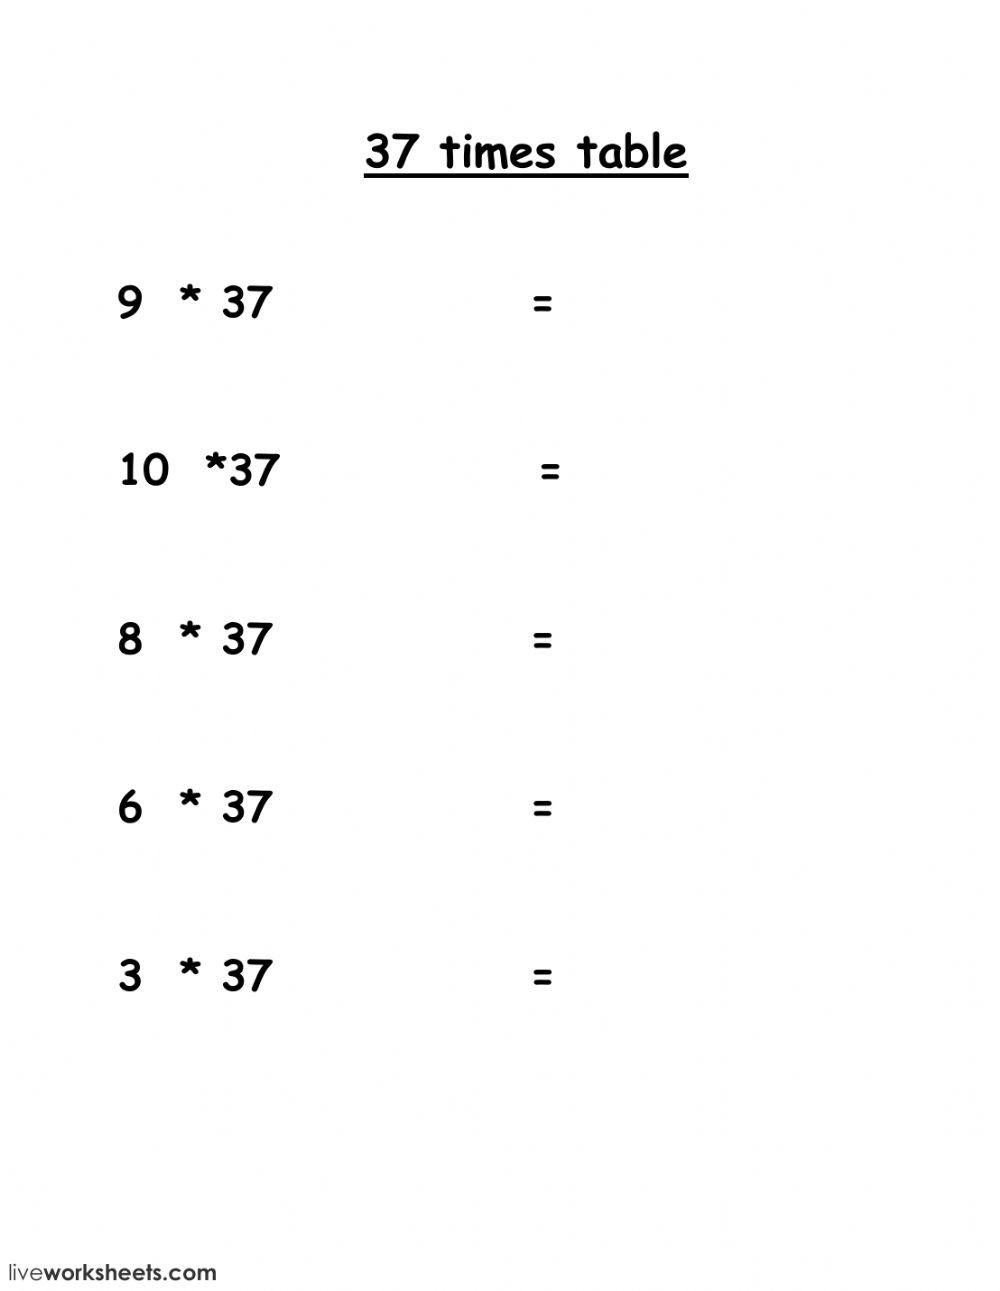 37 times table